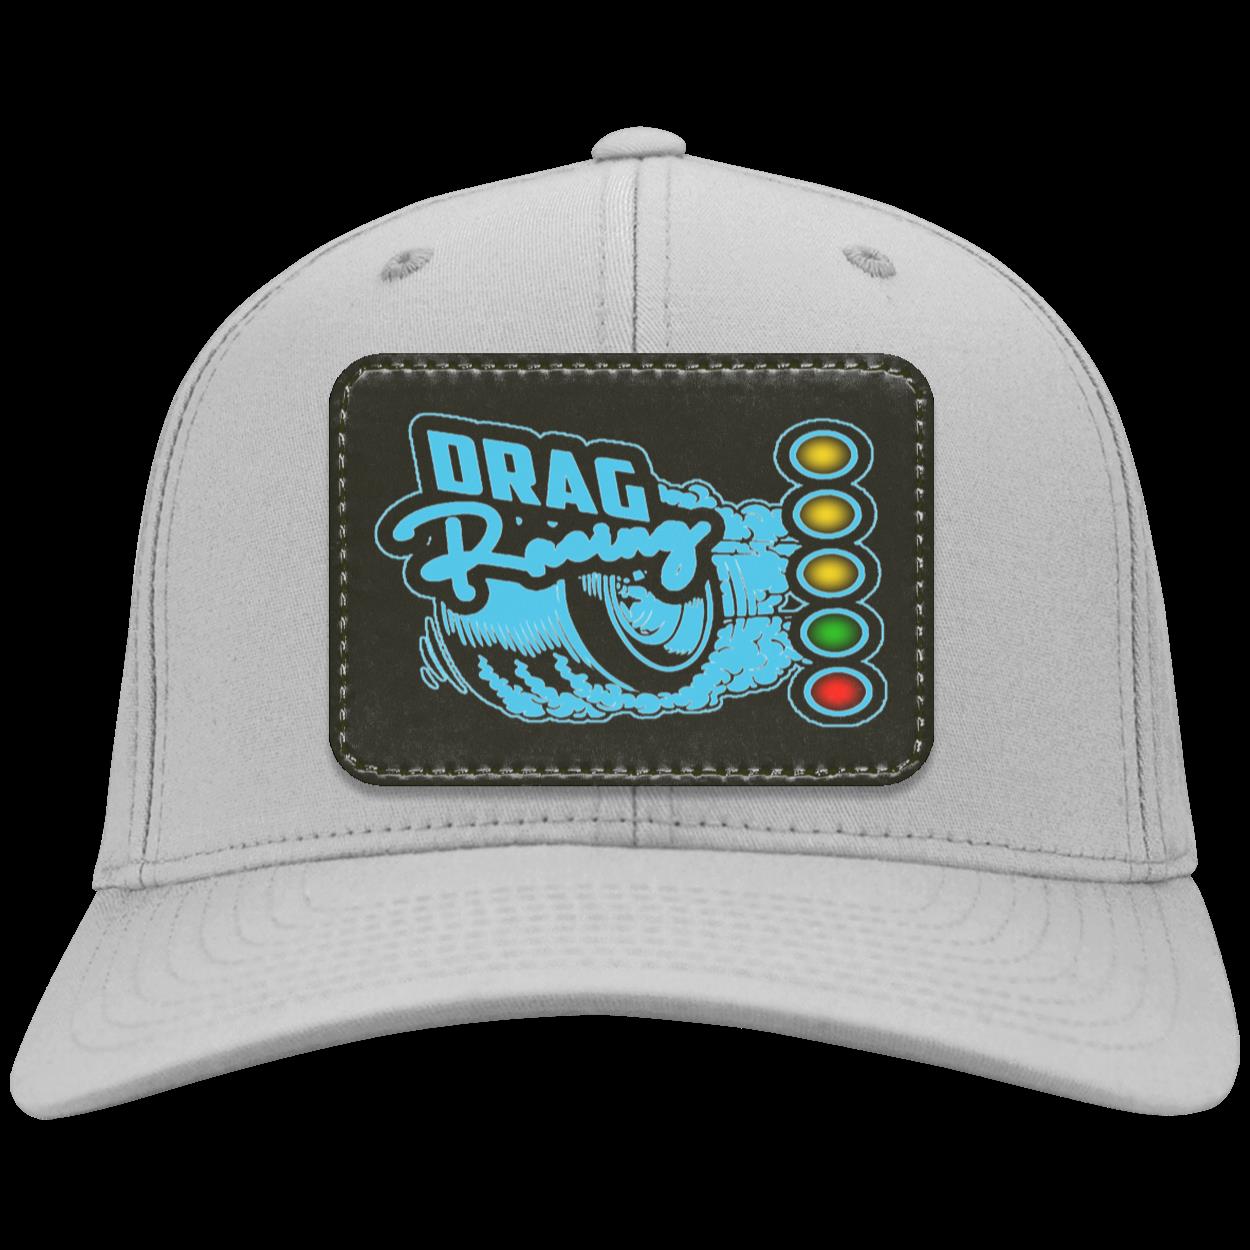 Drag Racing Patched Twill Cap V8